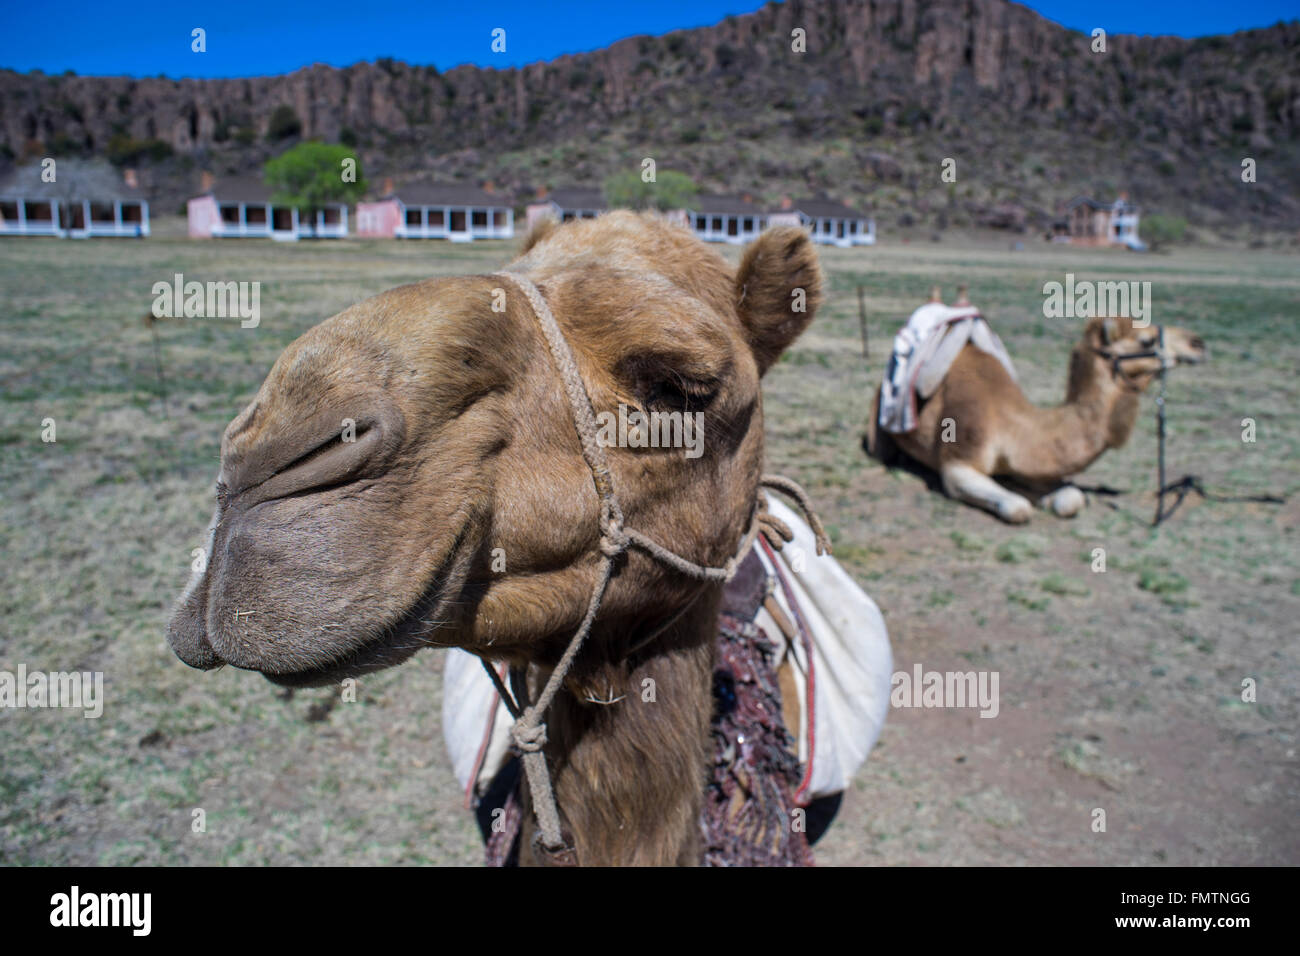 Camel on display at historical Fort Davis, Texas, during an event celebrating the U.S. Army Camel Corps. Stock Photo